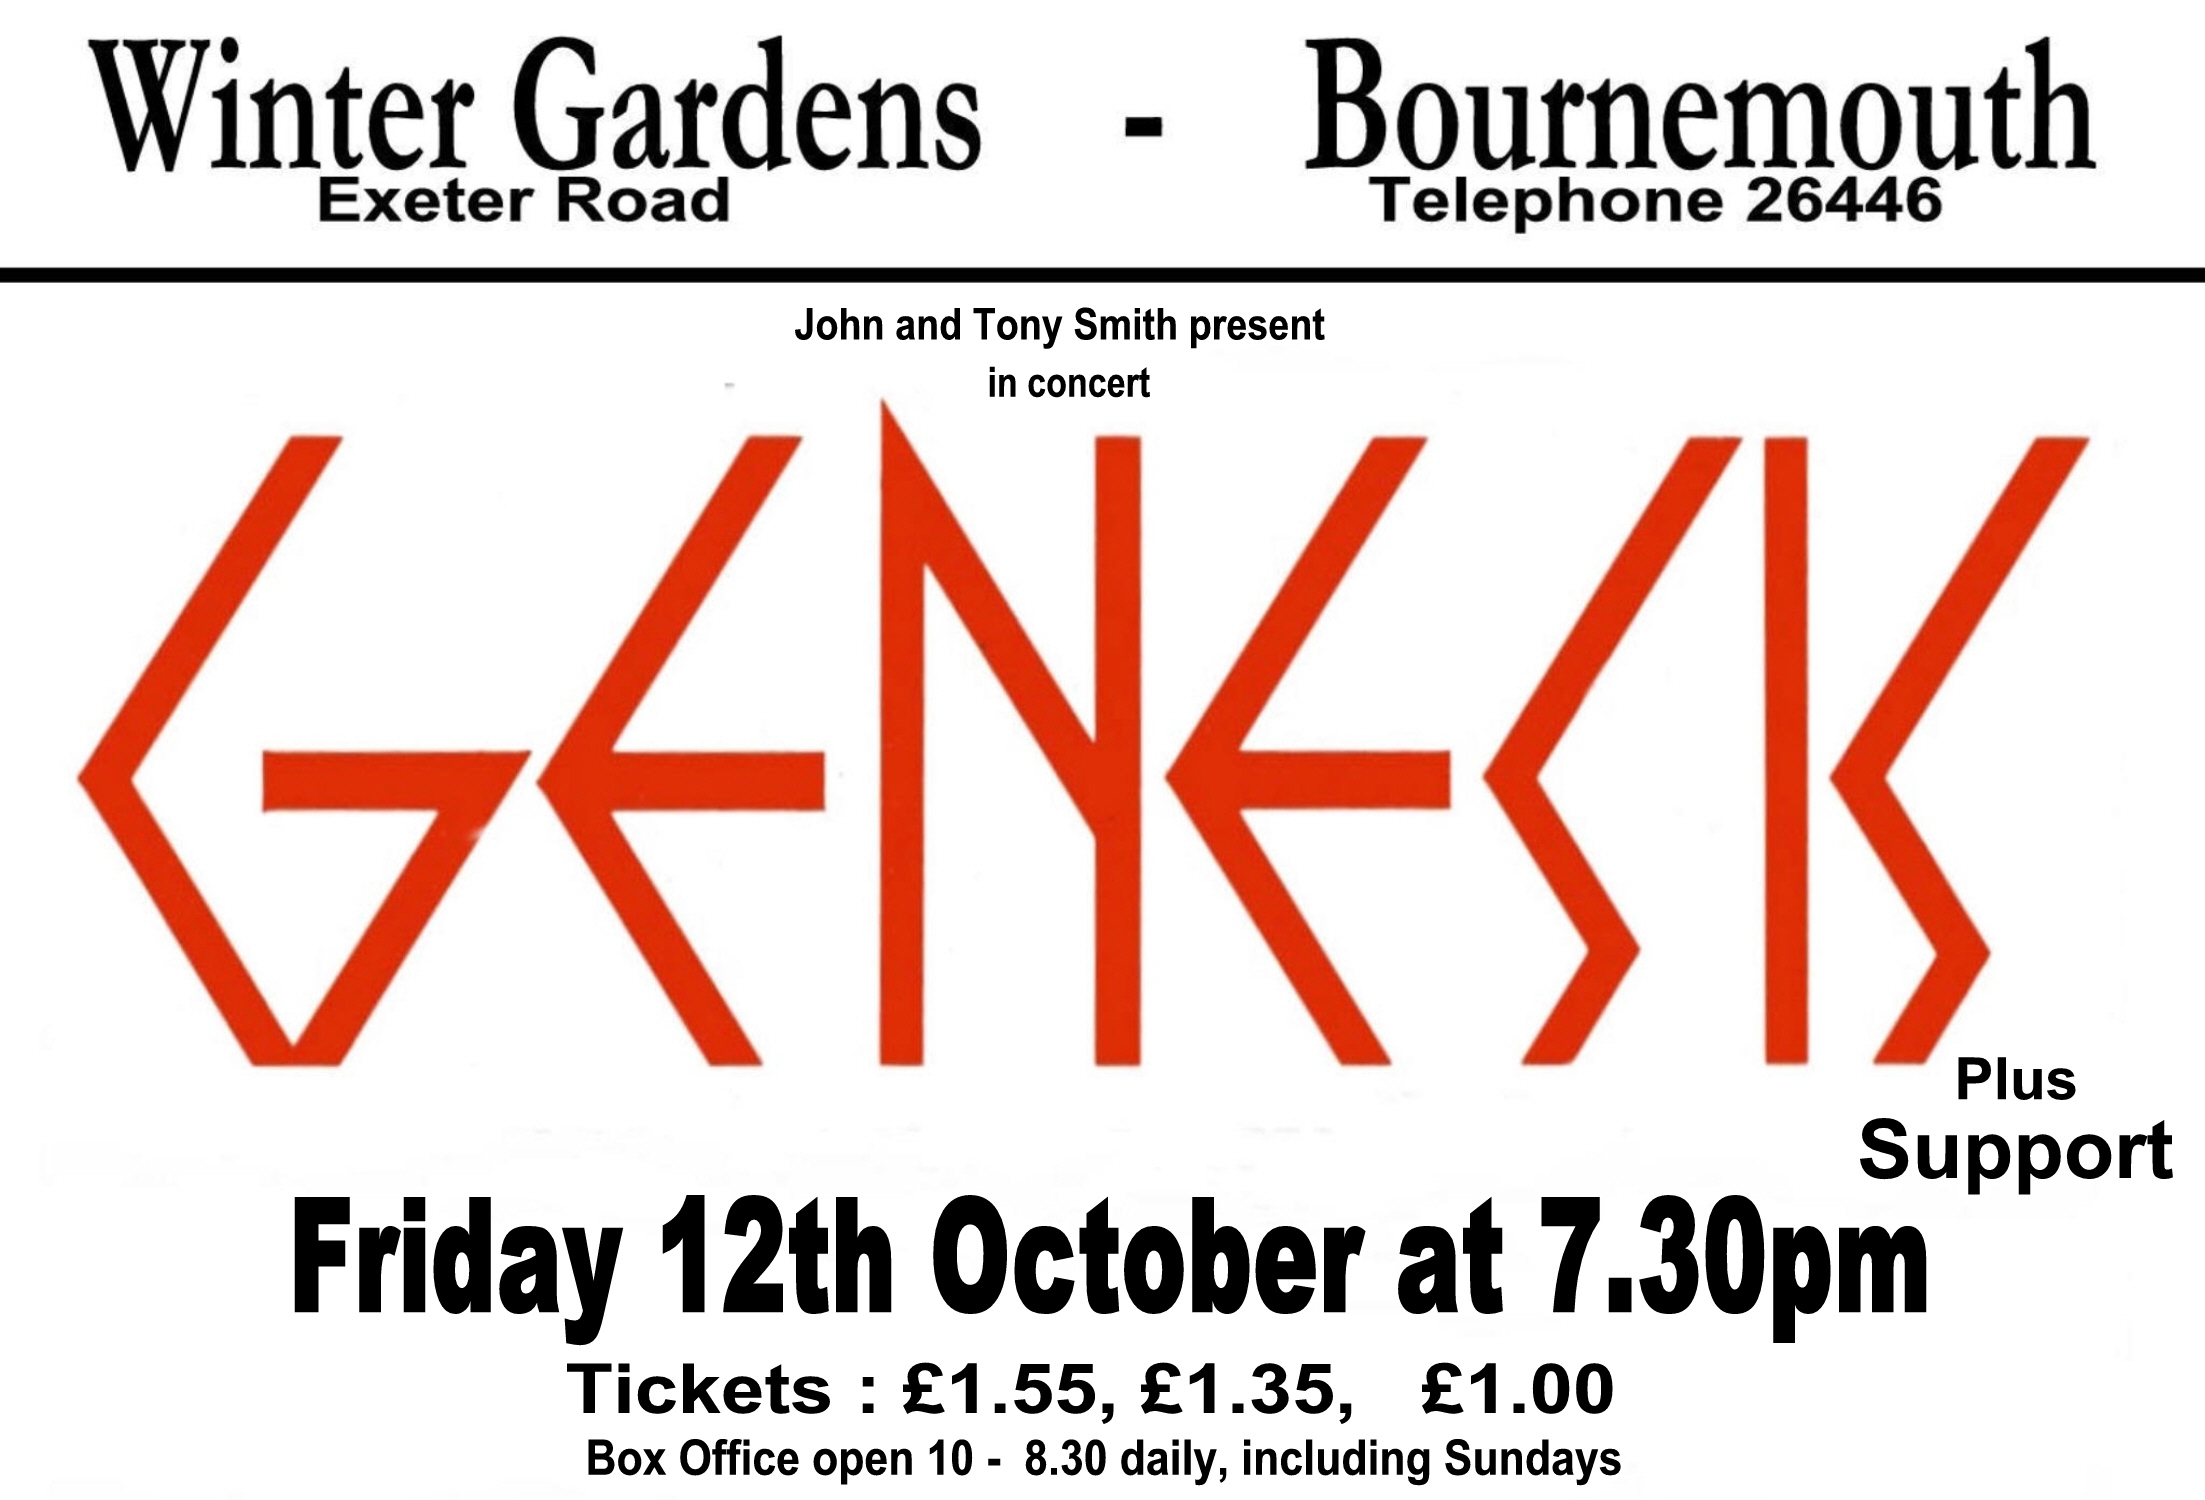 Email from Dave Robinson daverobinson5@hotmail.com Received 9.9.08. Oct 12th Genesis - 1973.